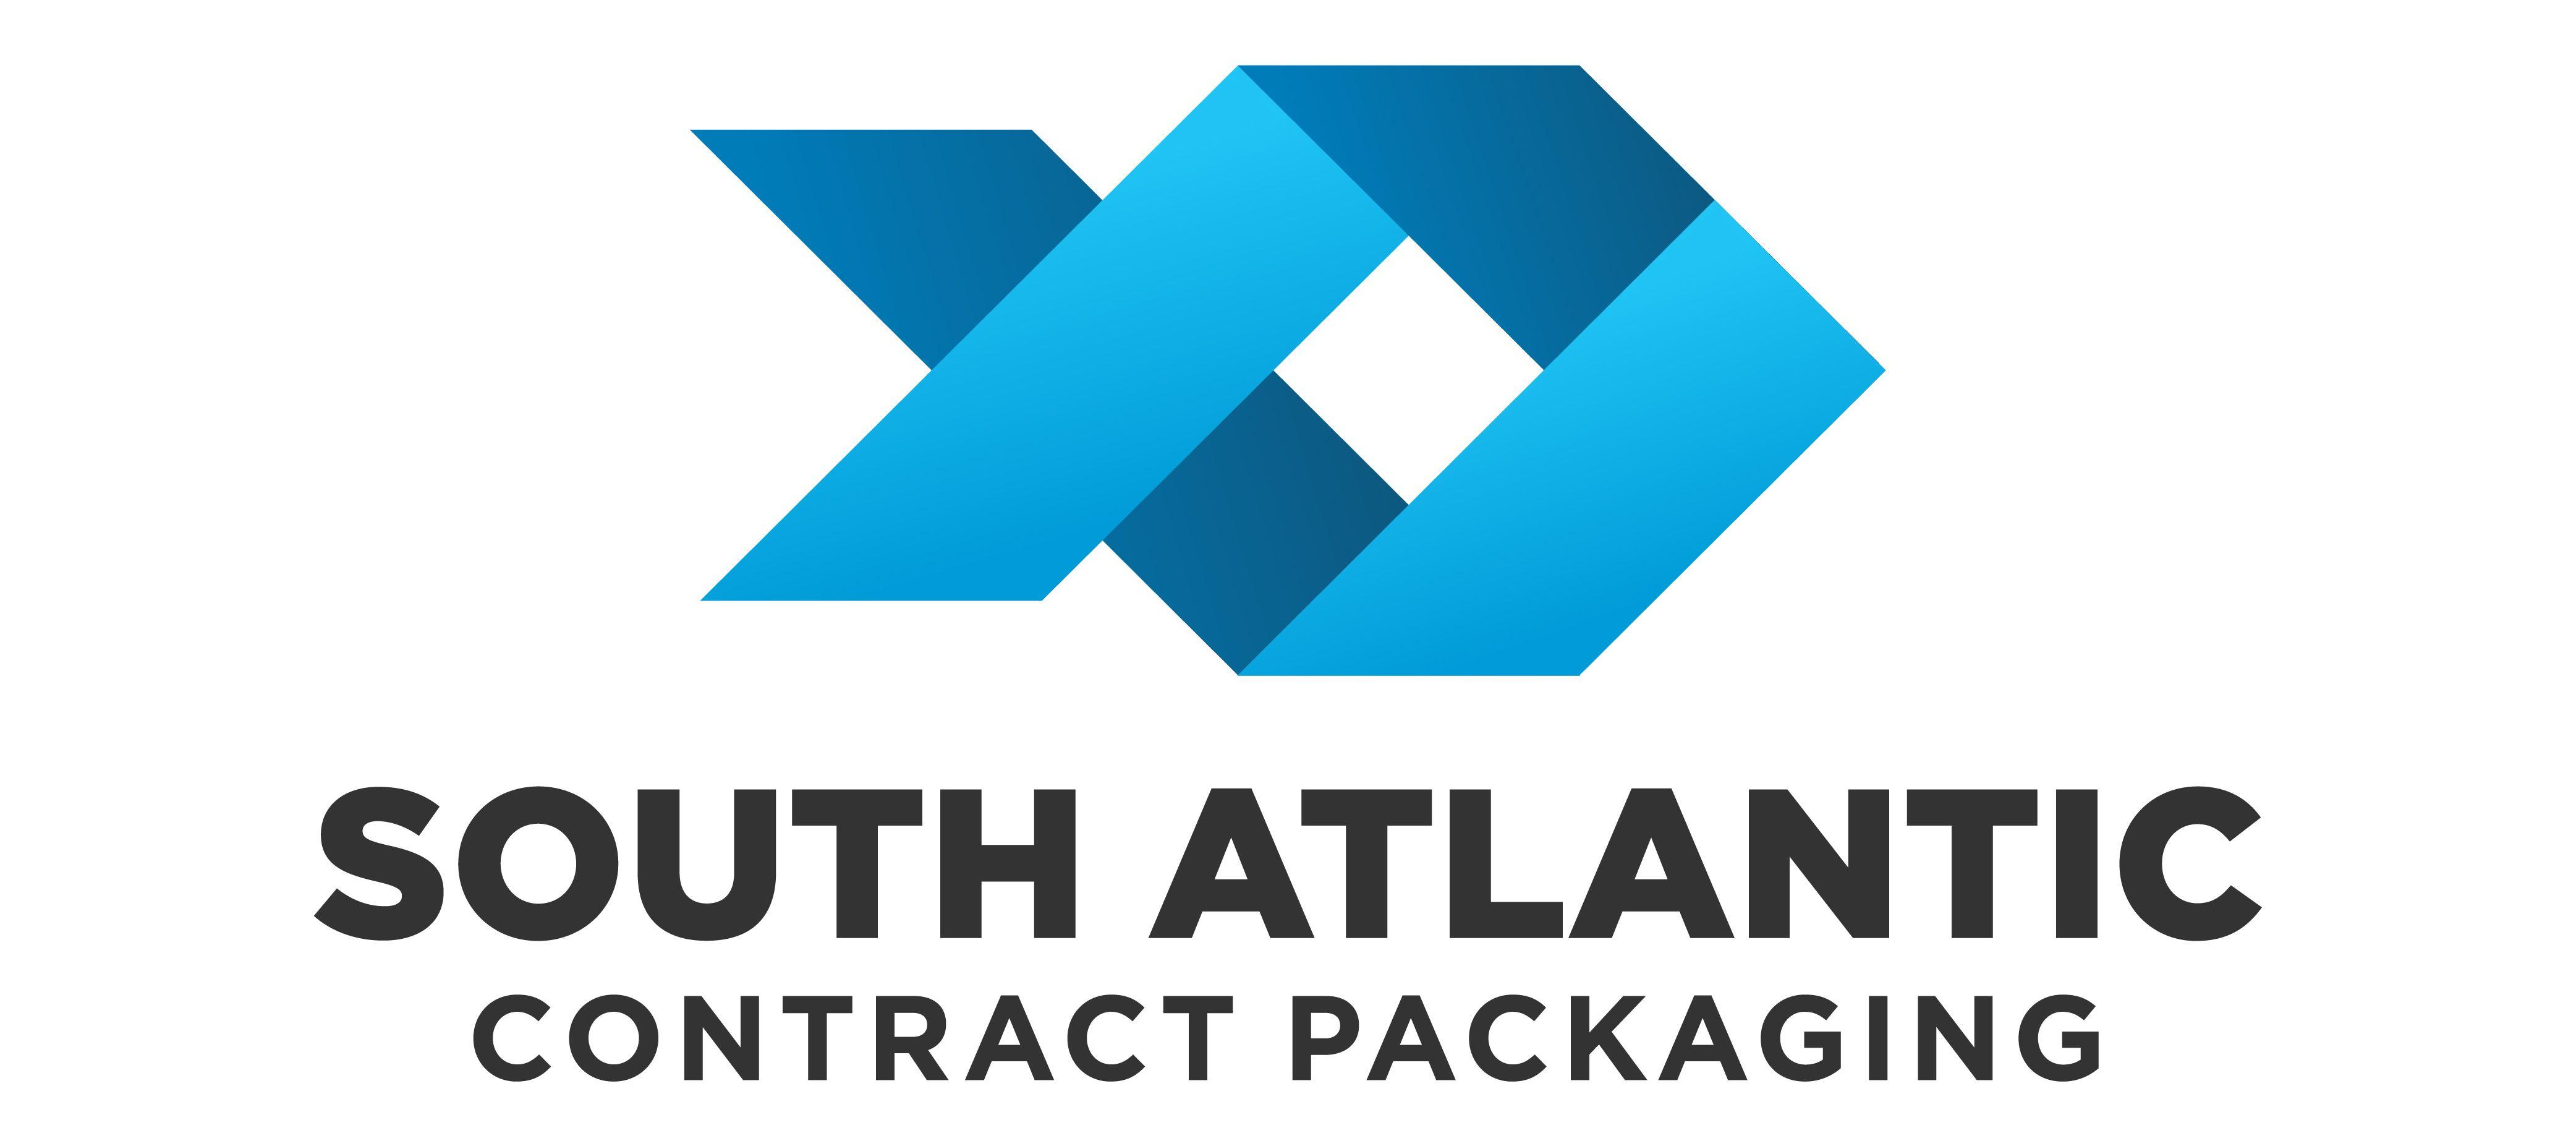 Packaging Logo - South Atlantic Contract Packaging Has a New Logo - South Atlantic ...